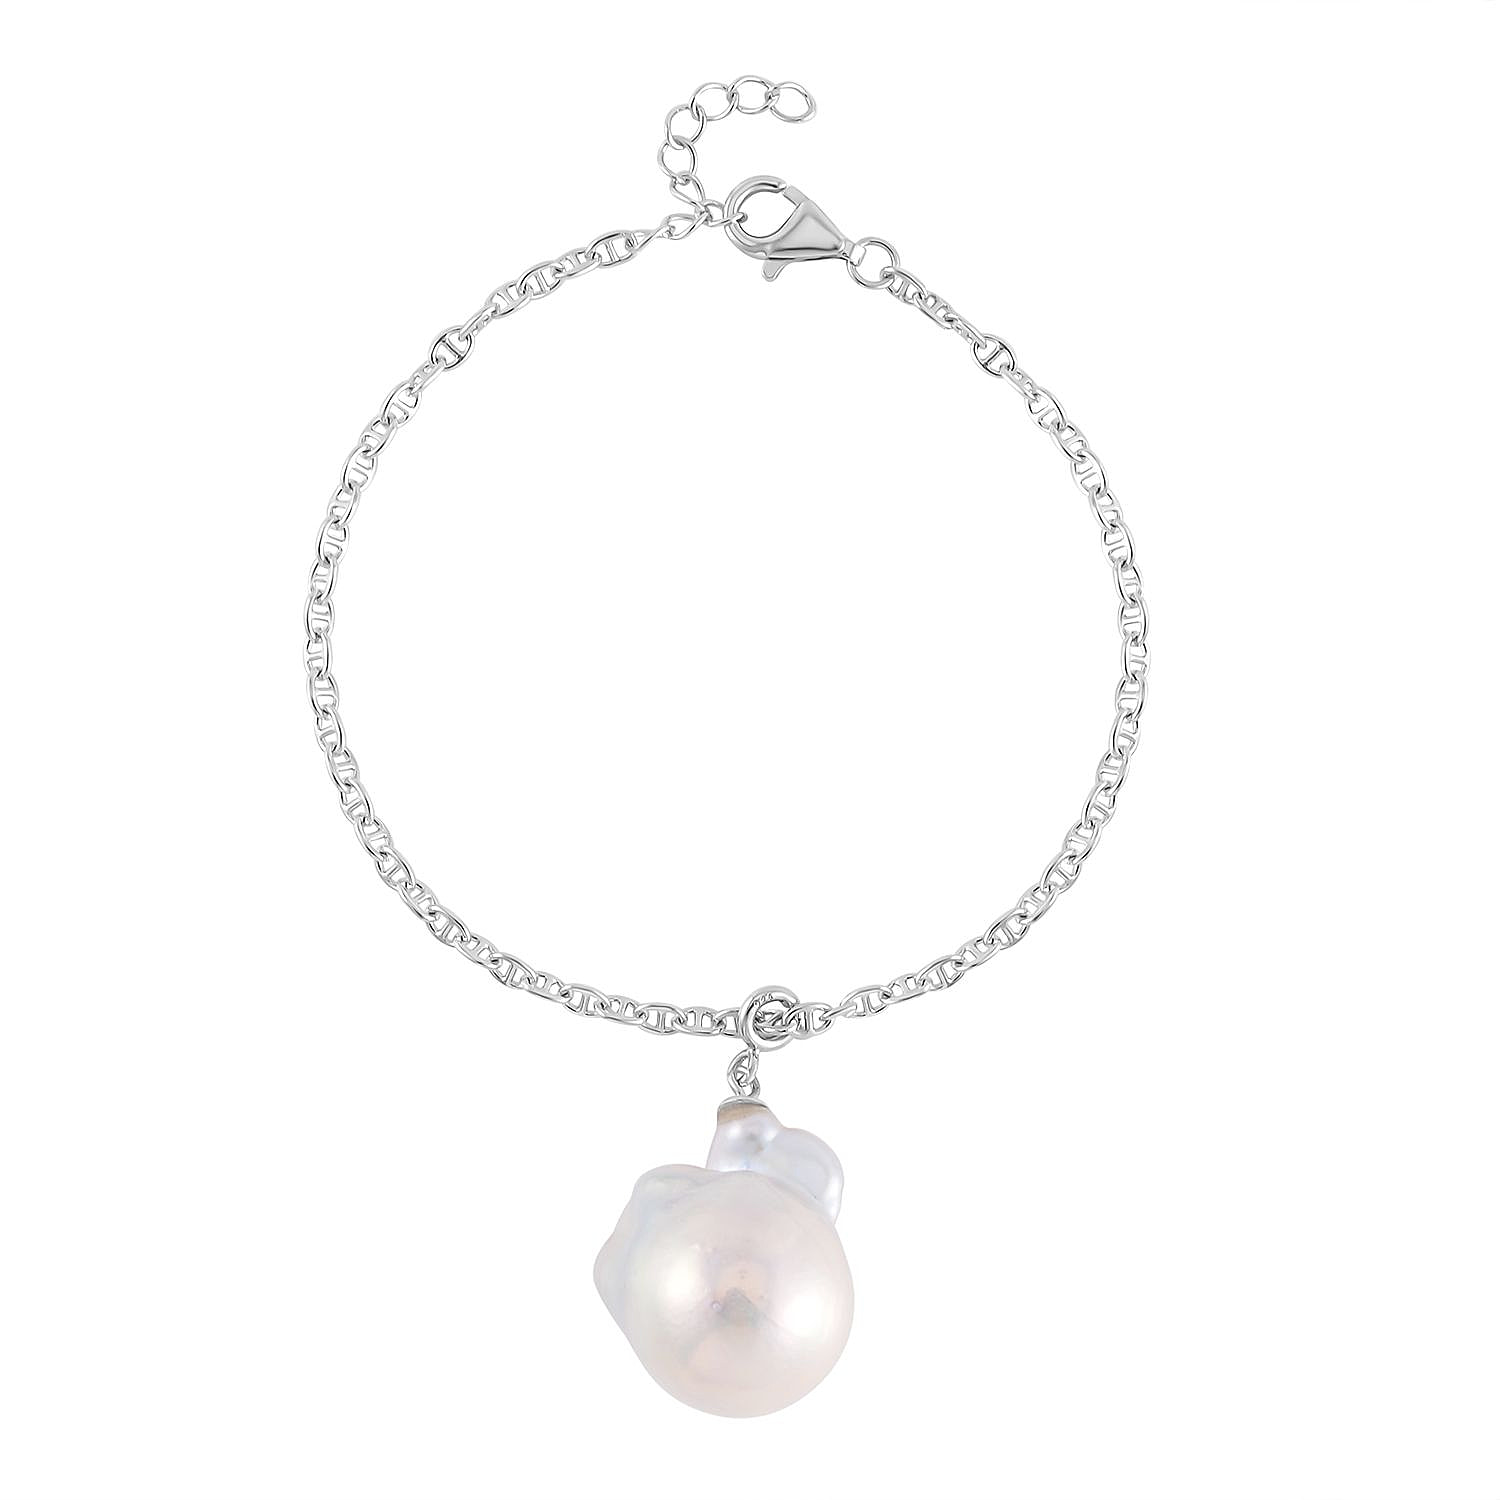 White Baroque Pearl Bracelet (Size 7-1 Inch Ext.) and Pendant in Rhodium Overlay Sterling Silver